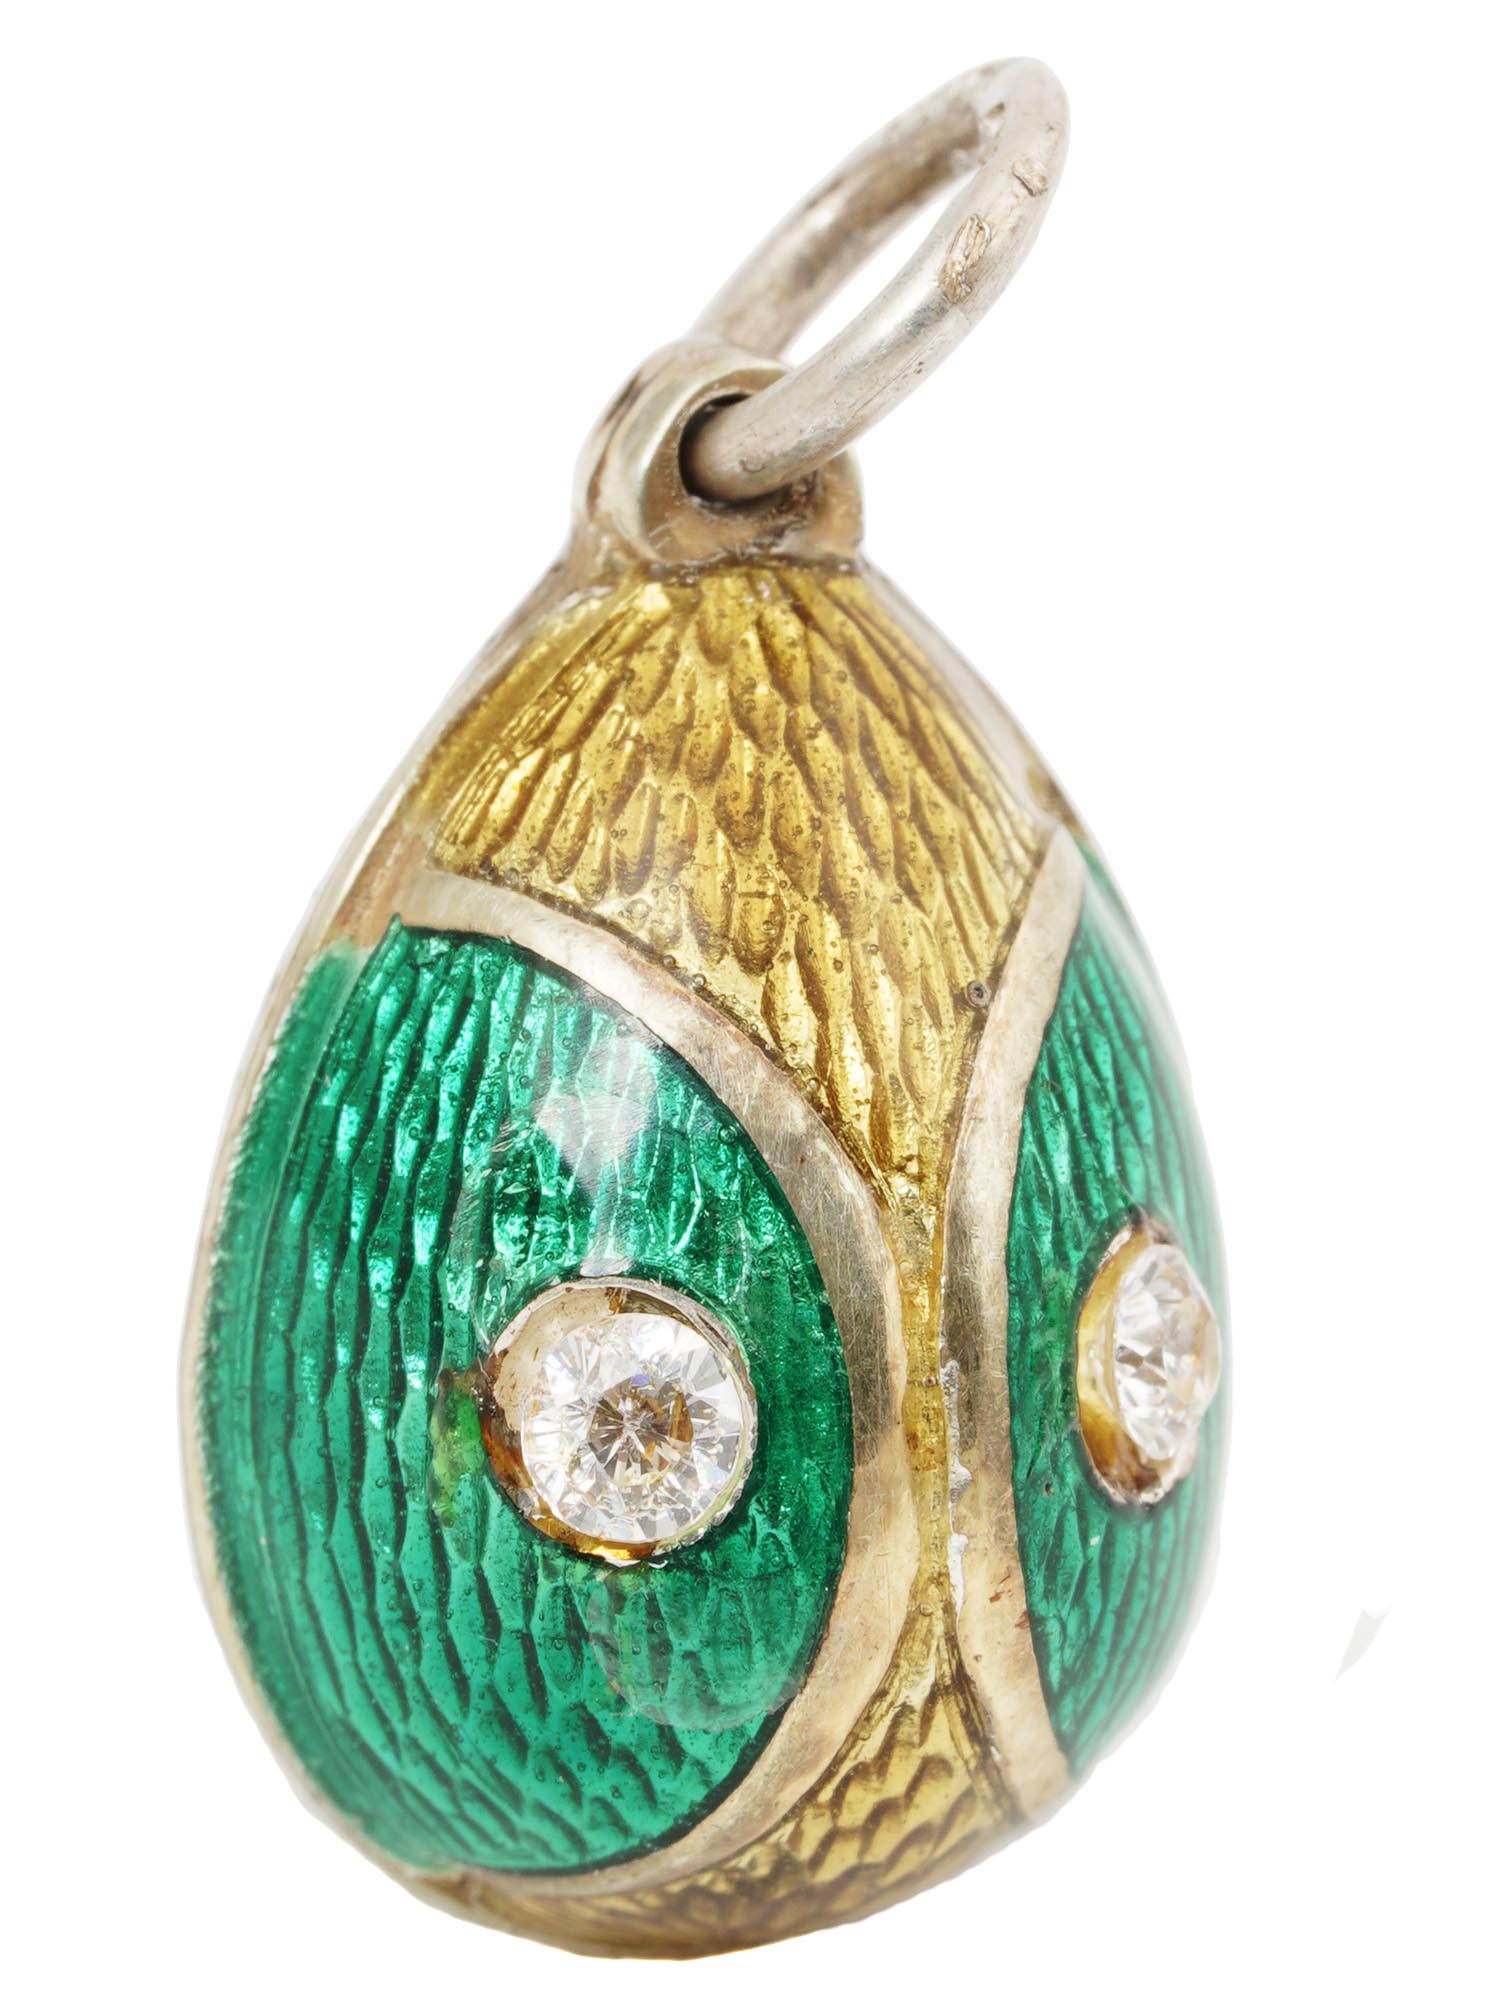 RUSSIAN 84 SILVER AND ENAMEL EASTER EGG PENDANT PIC-0